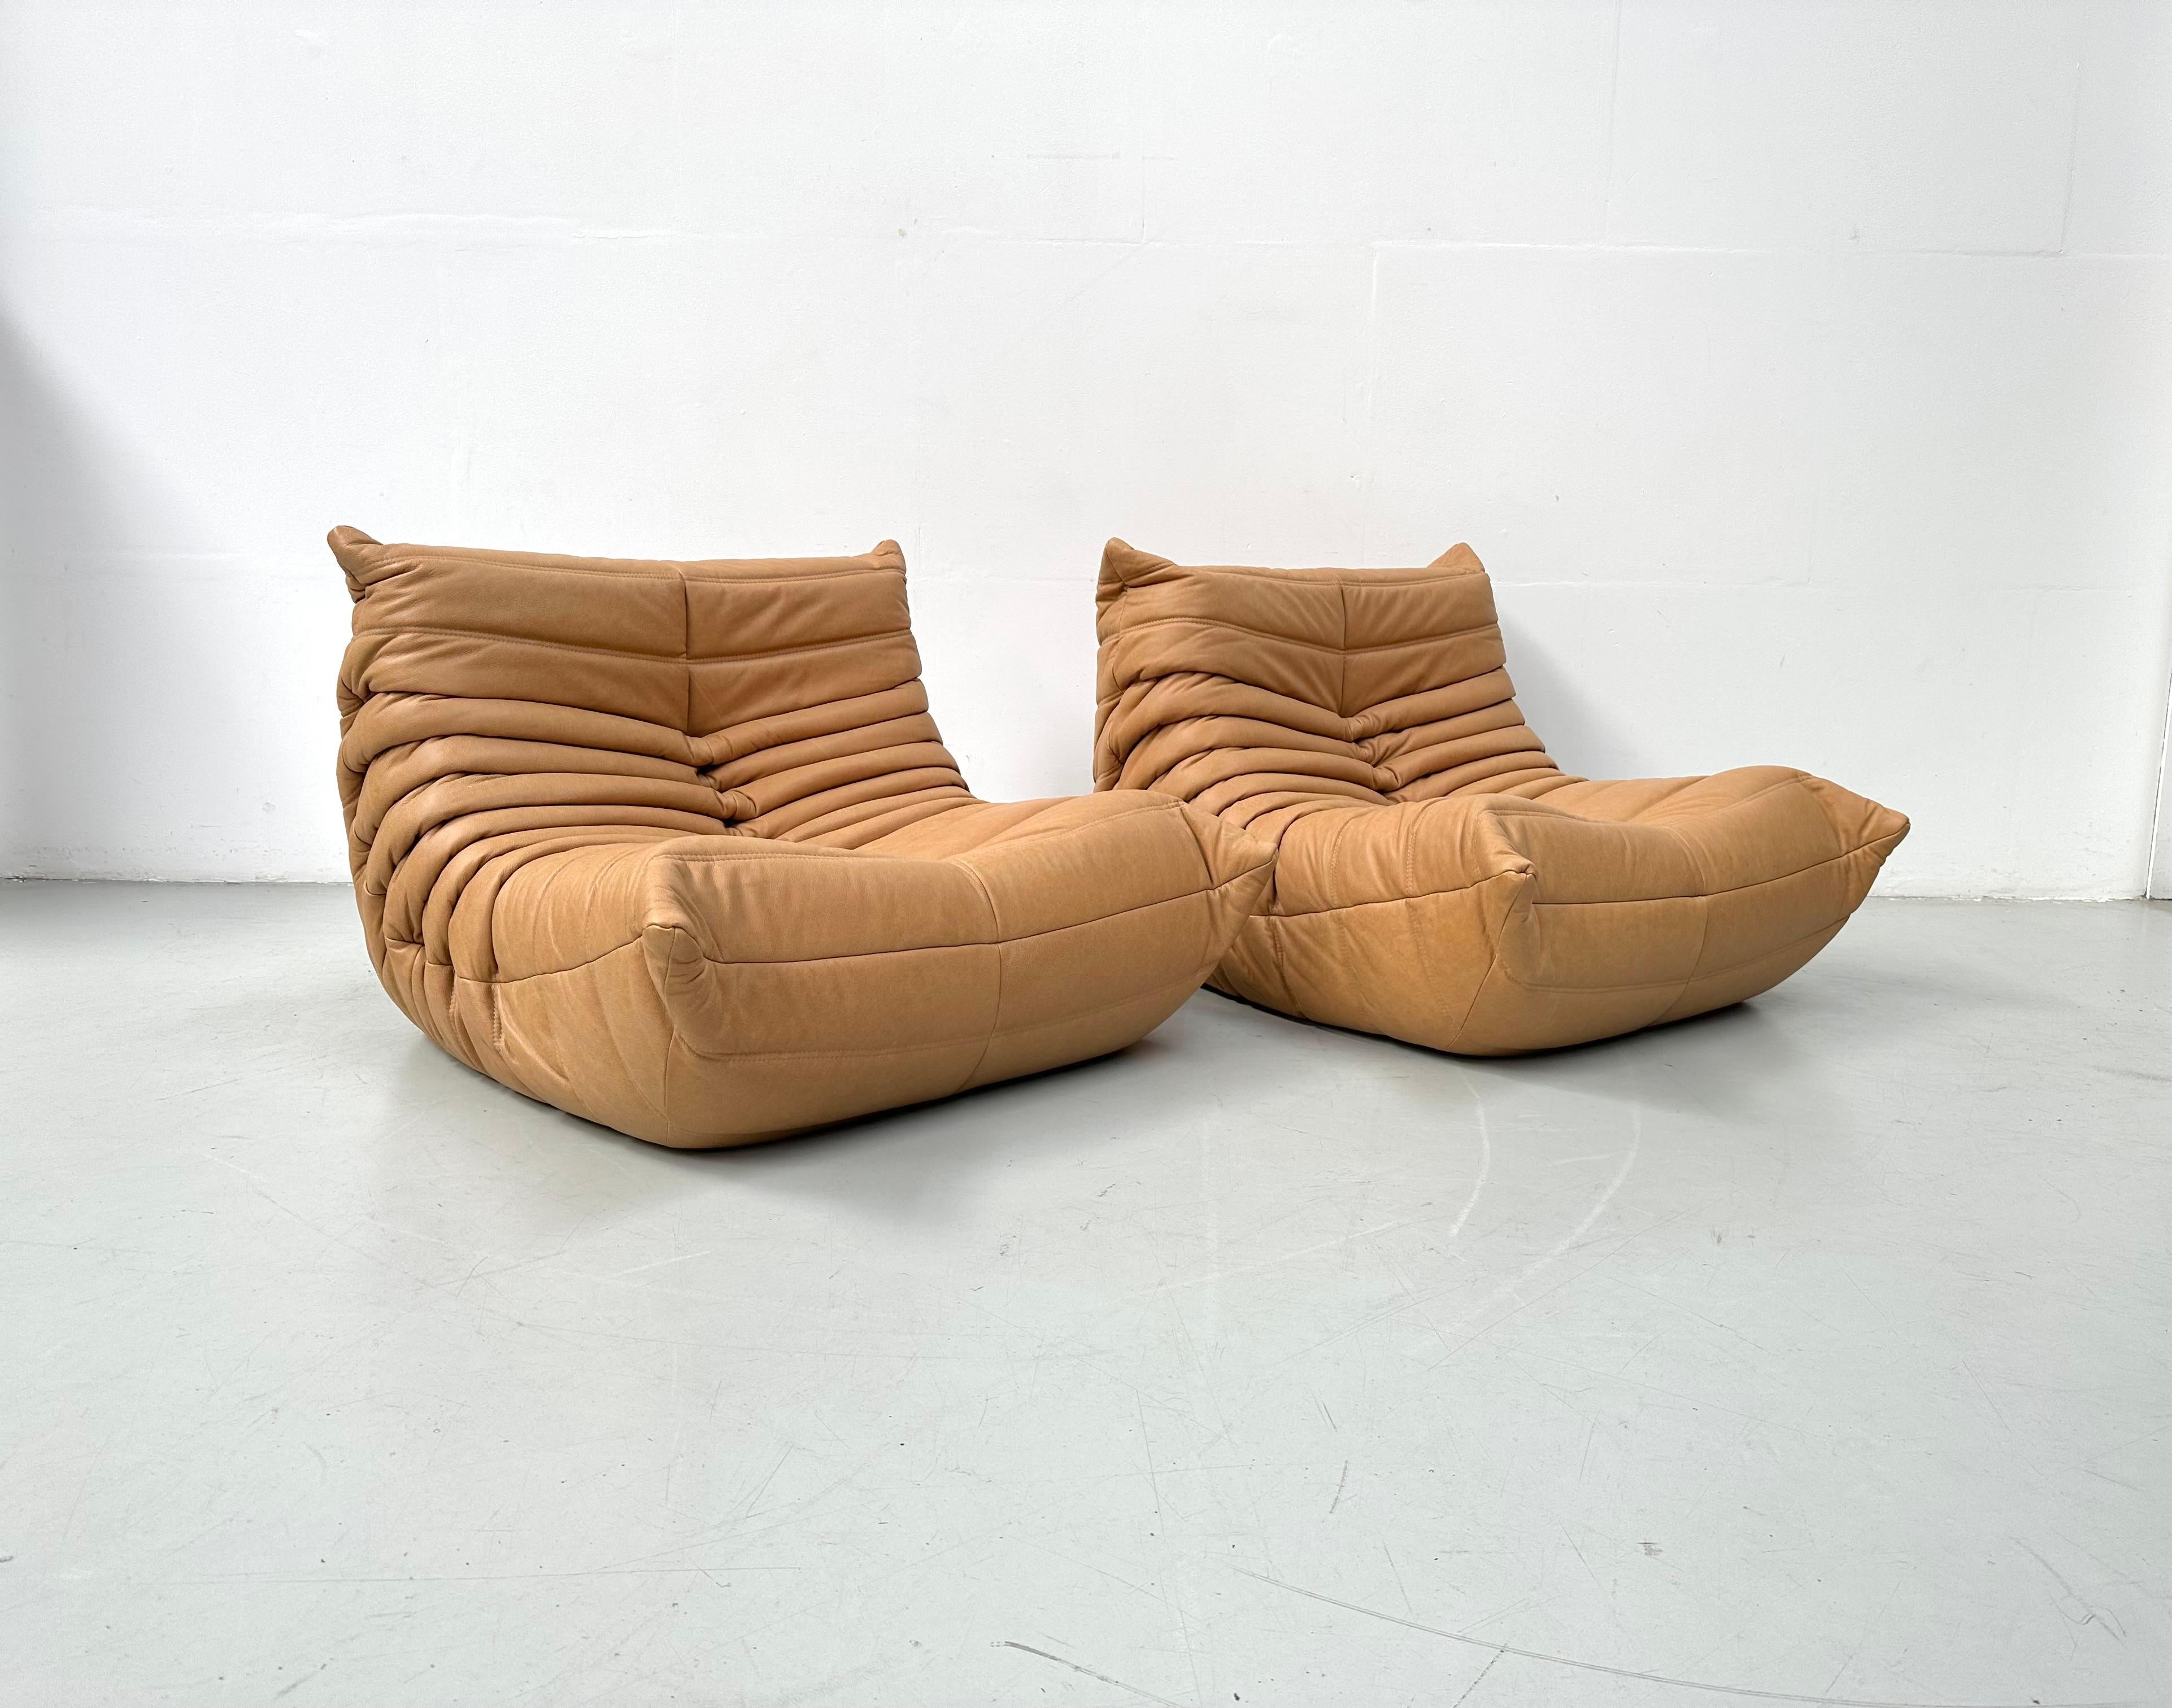 20th Century French Togo Chairs in Camel Leather by Michel Ducaroy for Ligne Roset.